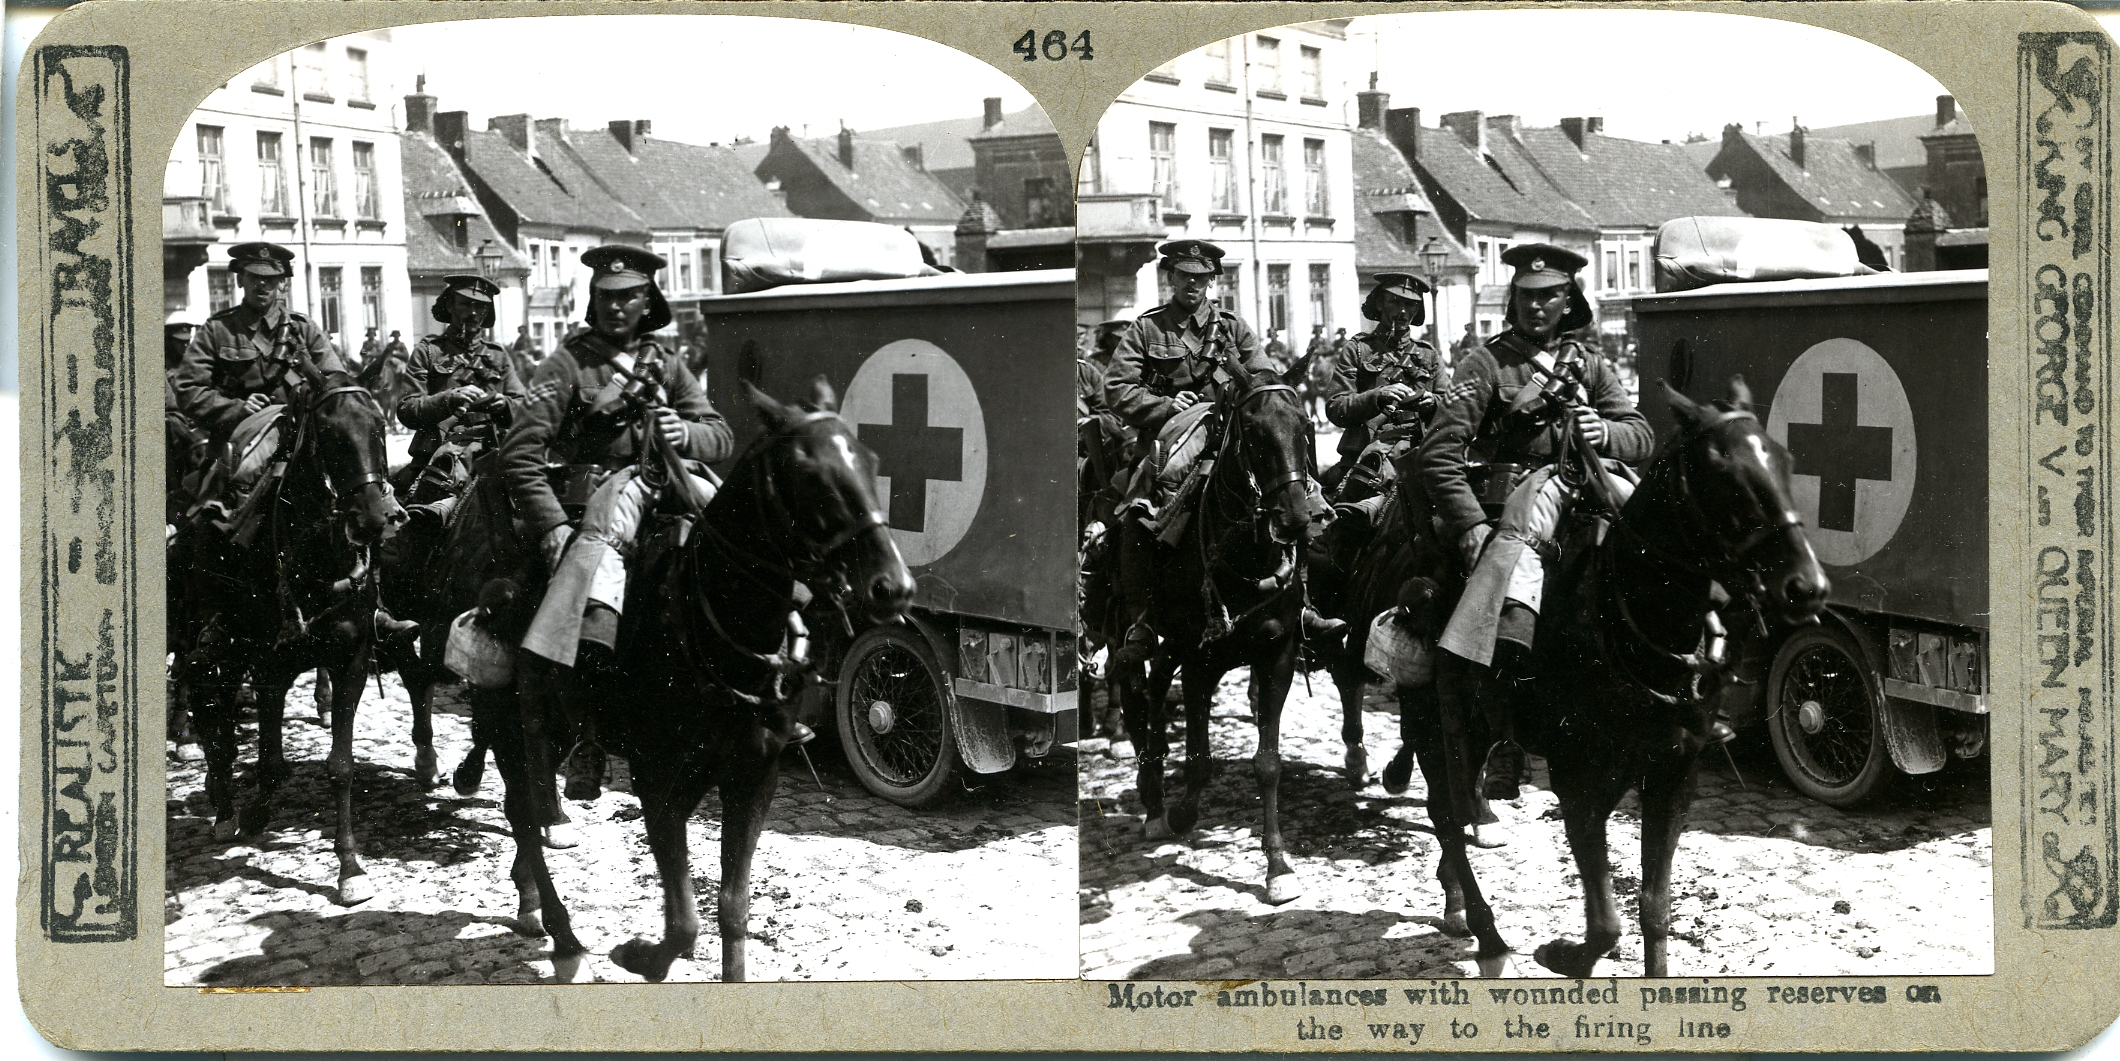 Motor ambulances with wounded passing reserves on the way to the firing line